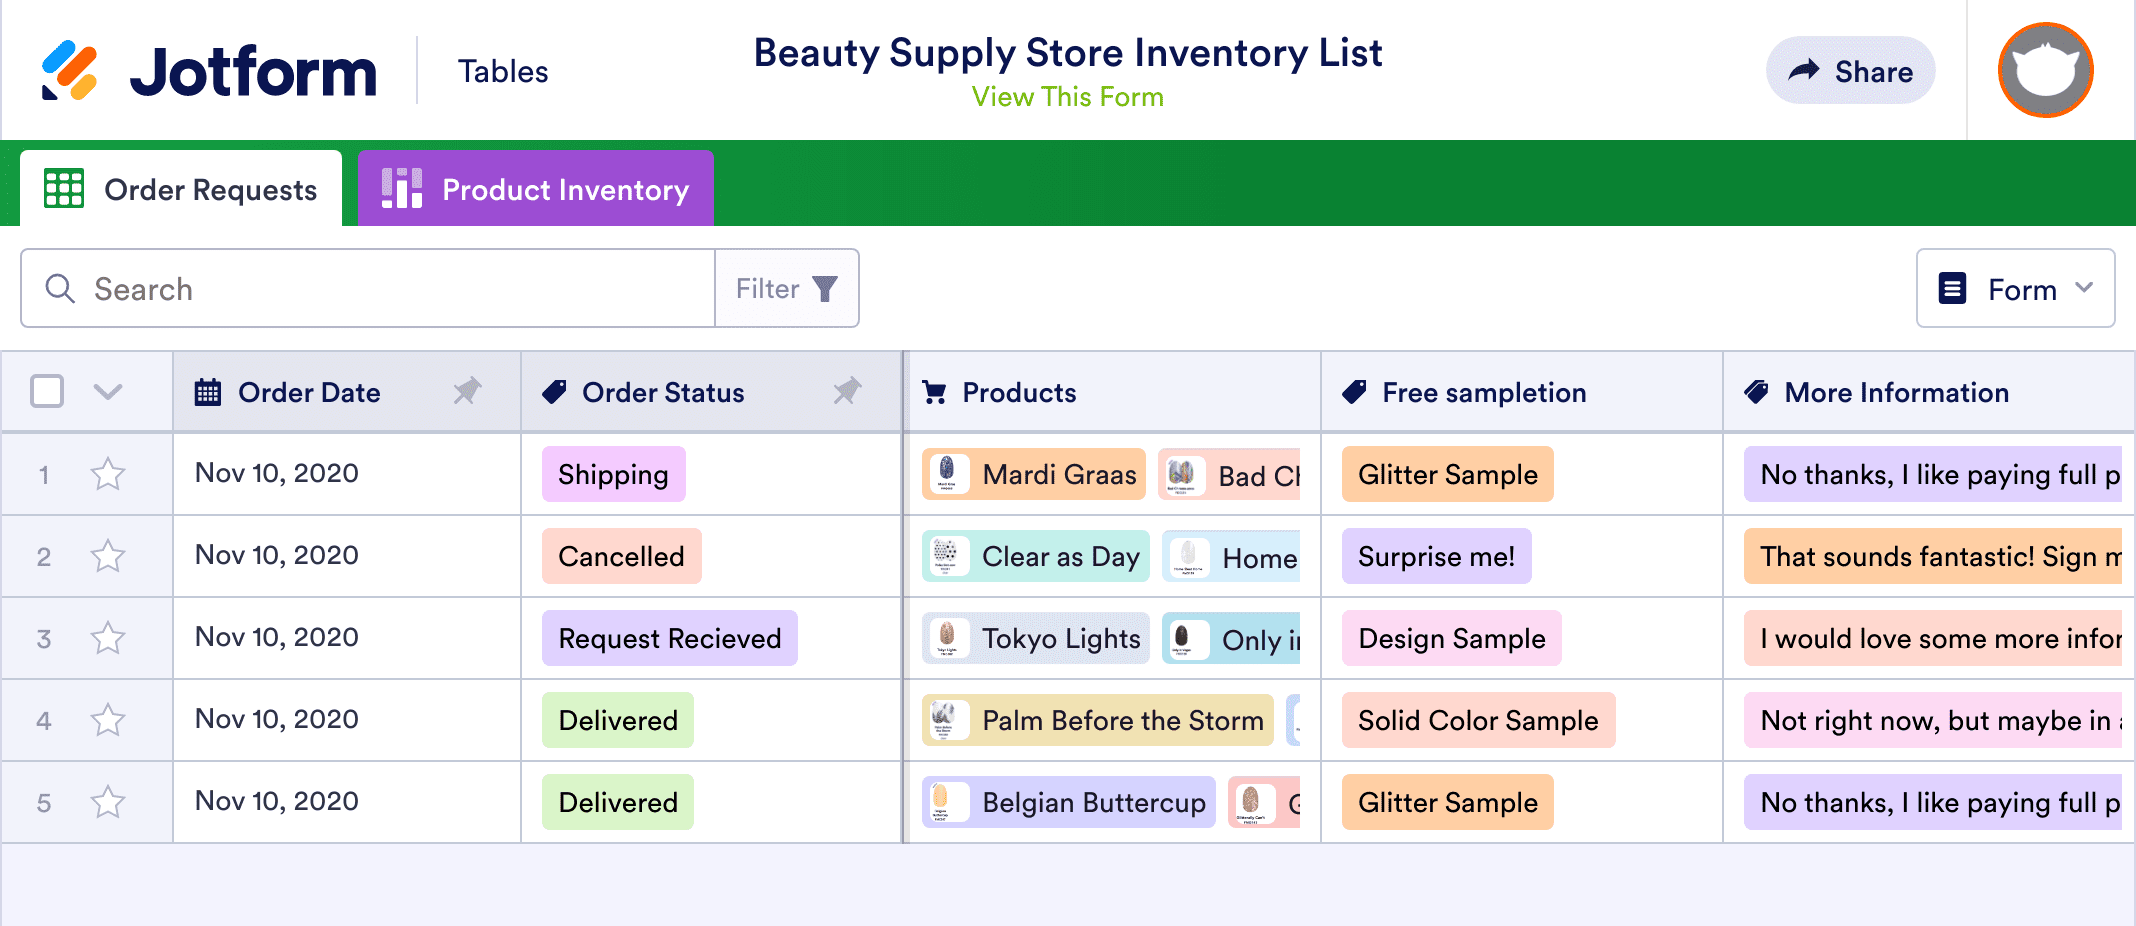 Beauty Supply Store Inventory List Template | Jotform Tables